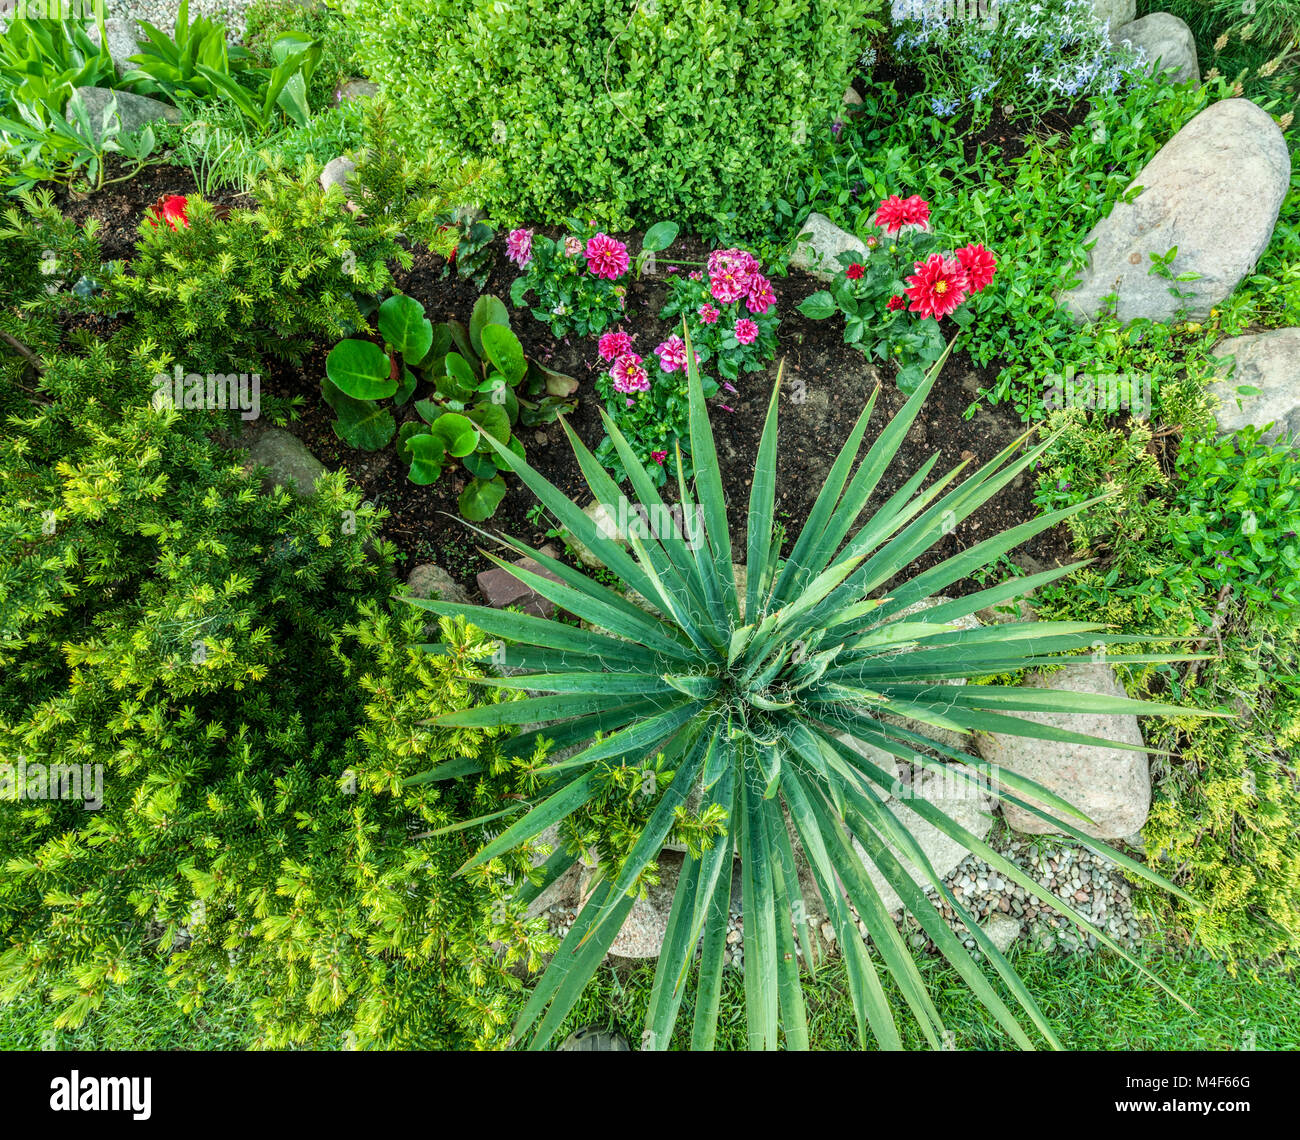 Landscaped summer garden with green plants, rocks, flowers Stock Photo